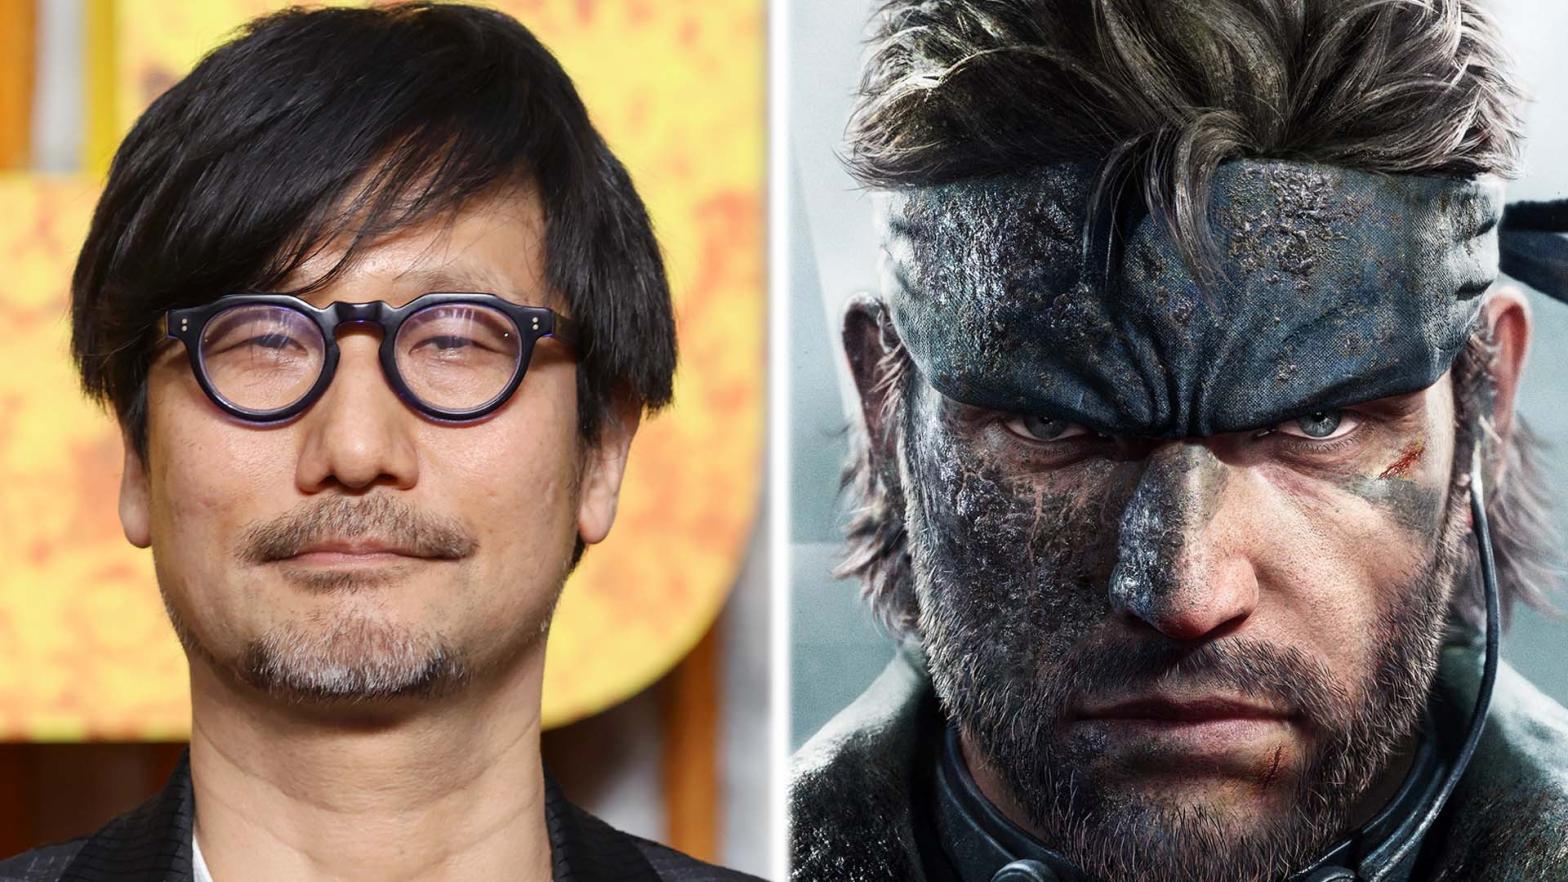 Metal Gear Solid 3 Remake Producer Says It Would Be A ‘Dream’ To Work With Kojima Again